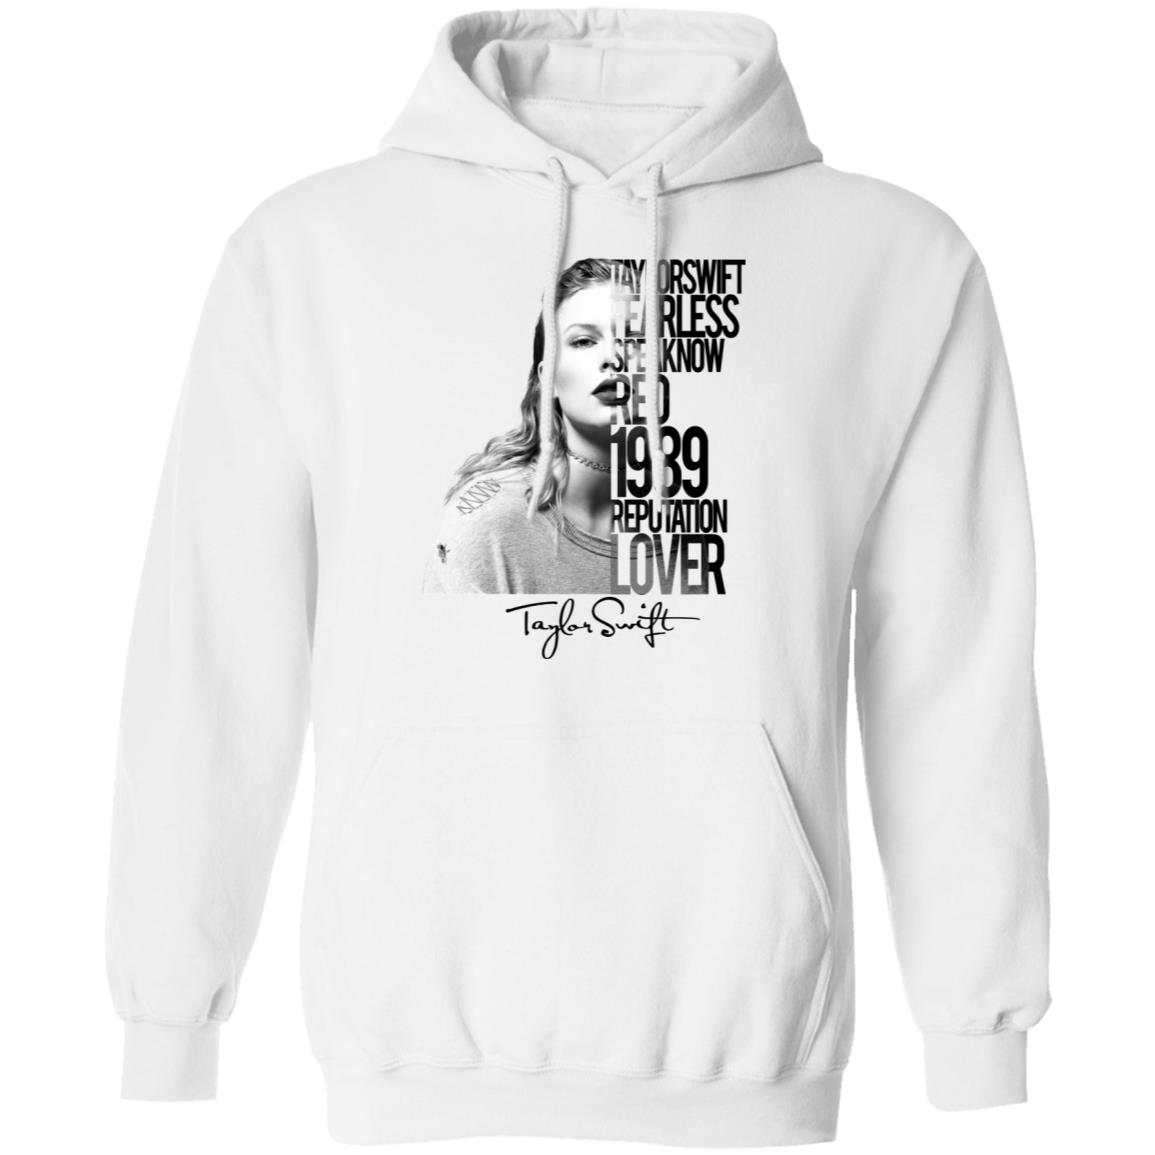 Taylor Swift Fearless Speak Now Red 1989 Reputation Lover Hoodie T Shirt